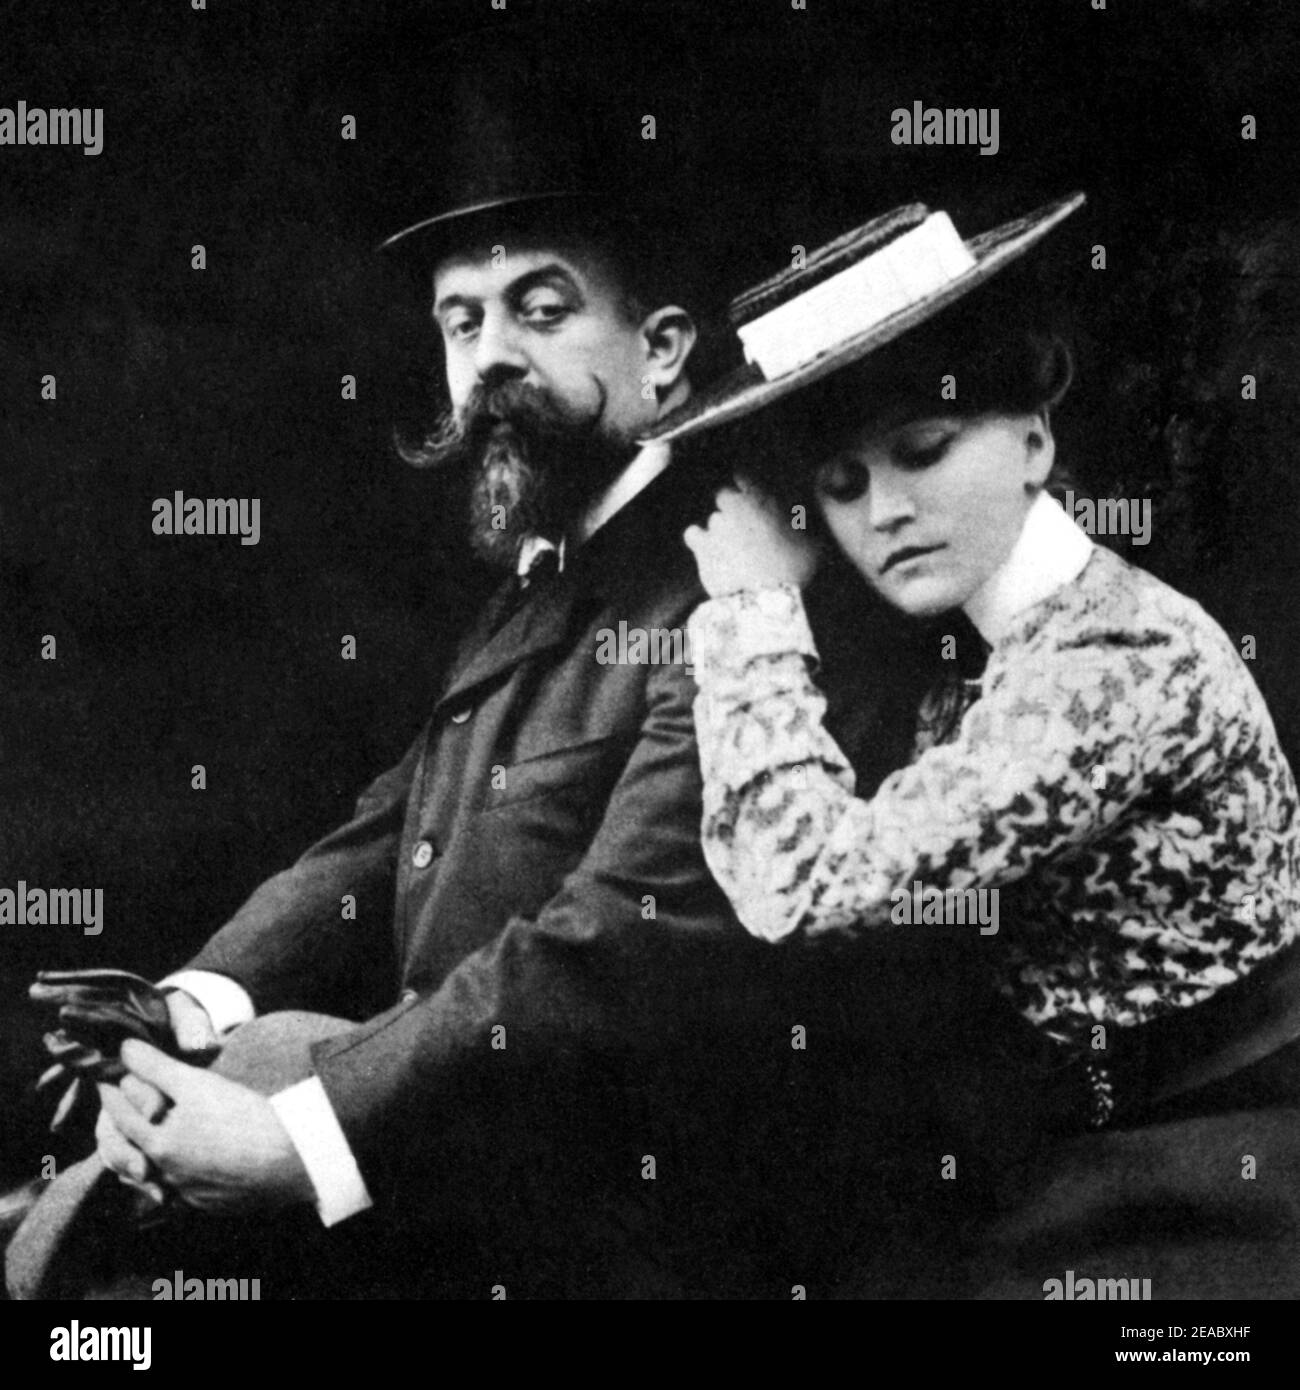 1900 ca. Paris , France  : The celebrated french woman writer COLETTE  Willy ( born Sidonie Gabrielle Colette -  1873 - 1954 ) with the housband WILLY Gauthier - Villars - SCRITTRICE - SCRITTORE - LETTERATO - LITERATURE - LETTERATURA  -  marito e moglie - wife - abbraccio - embrace - lovers - amanti - sposi - coniugi - hat - cappello - top hat - cilindro - barba e baffi - beard and moustache   - portrait - ritratto  - BELLE EPOQUE ----  Archivio GBB Stock Photo